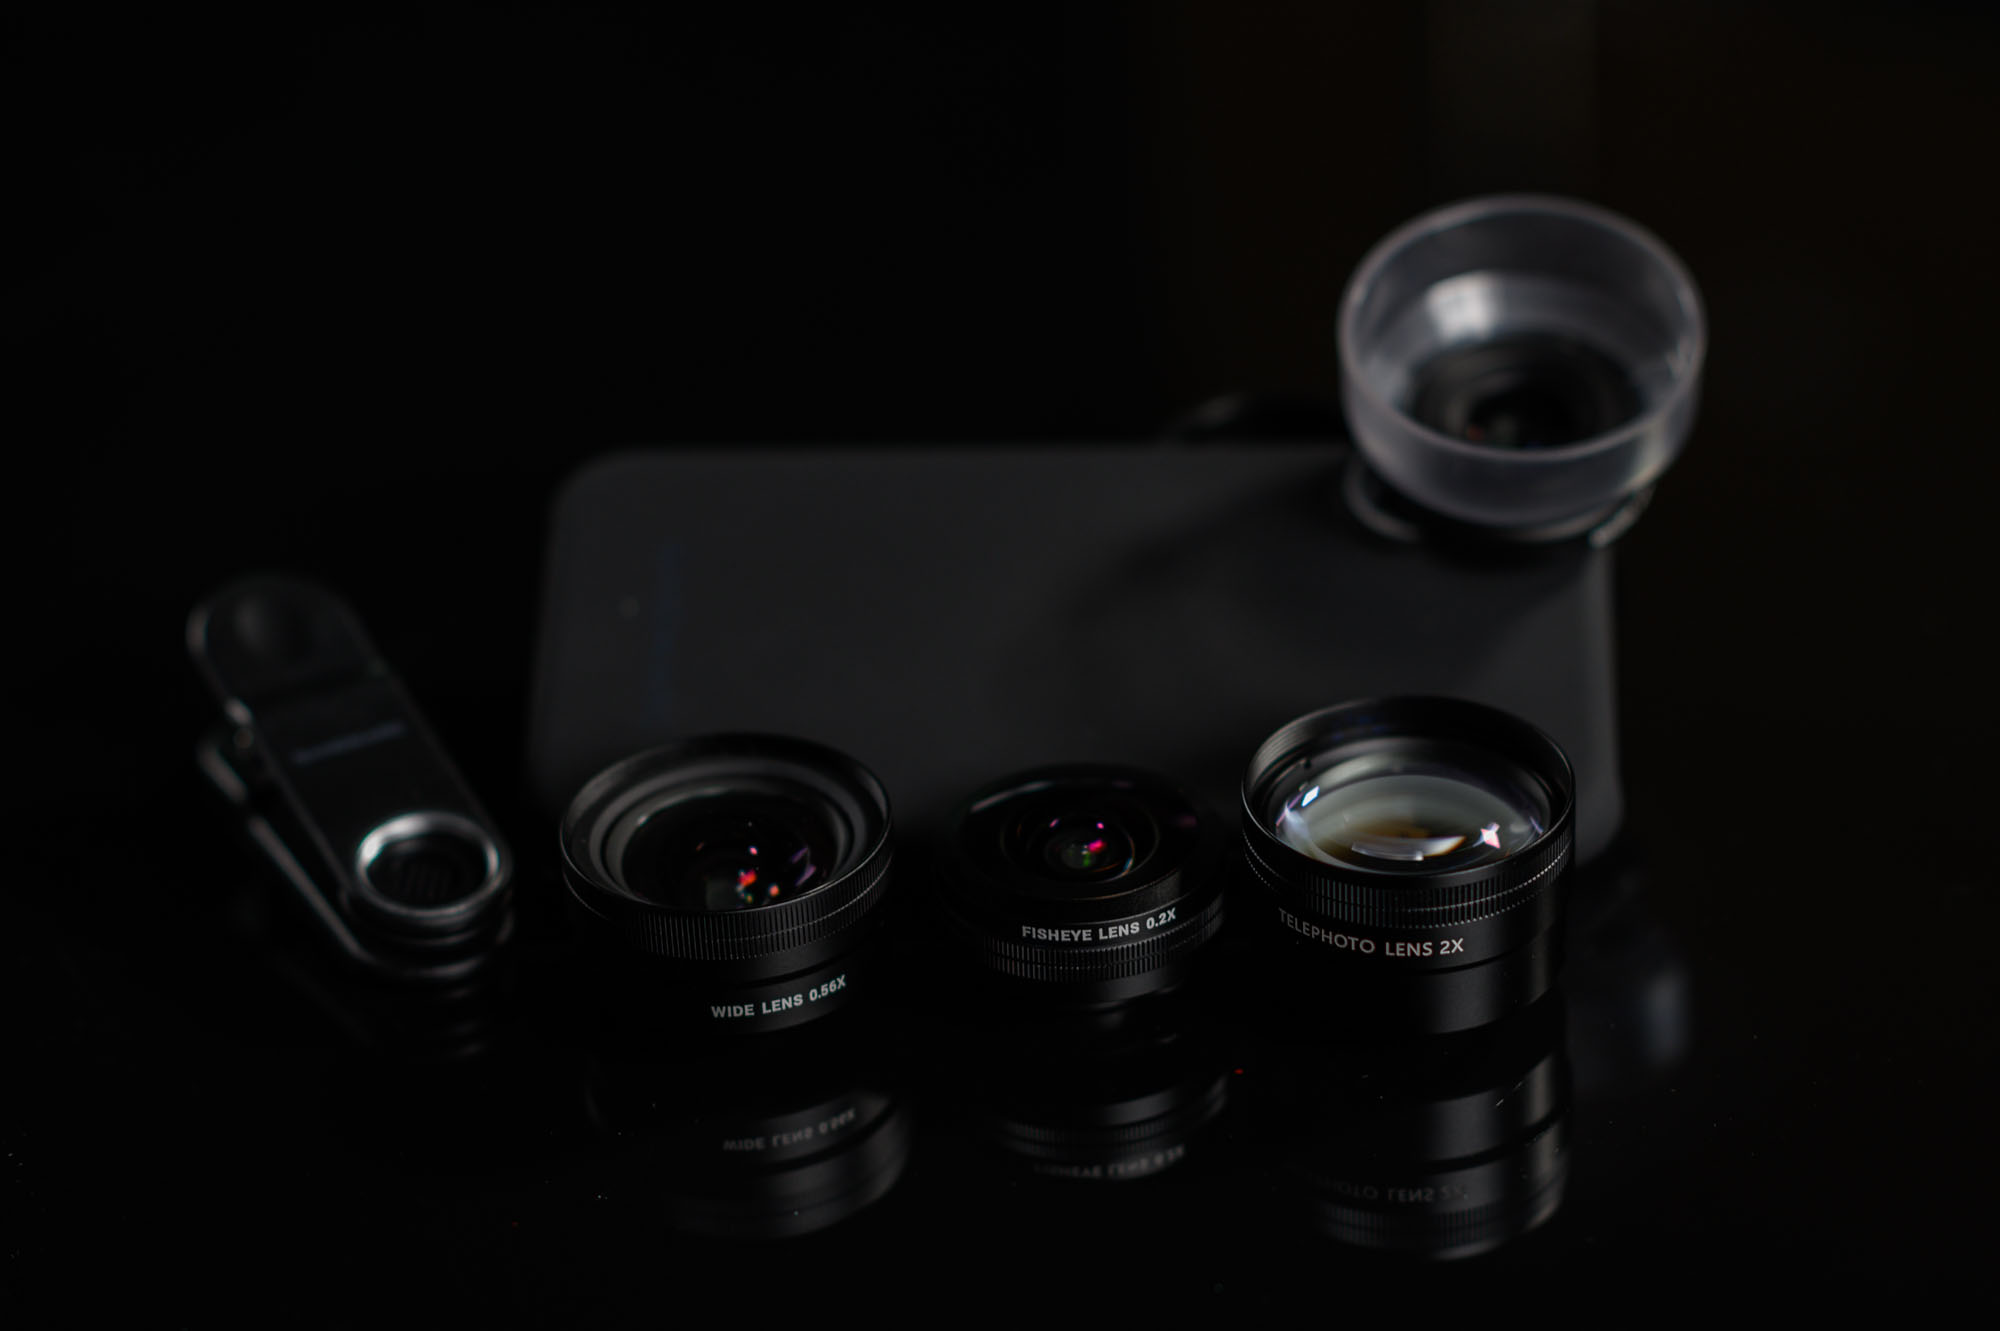 Sandmarc iPhone Lens Review – A Fun Entry Into The World of High Quality Mobile Photography